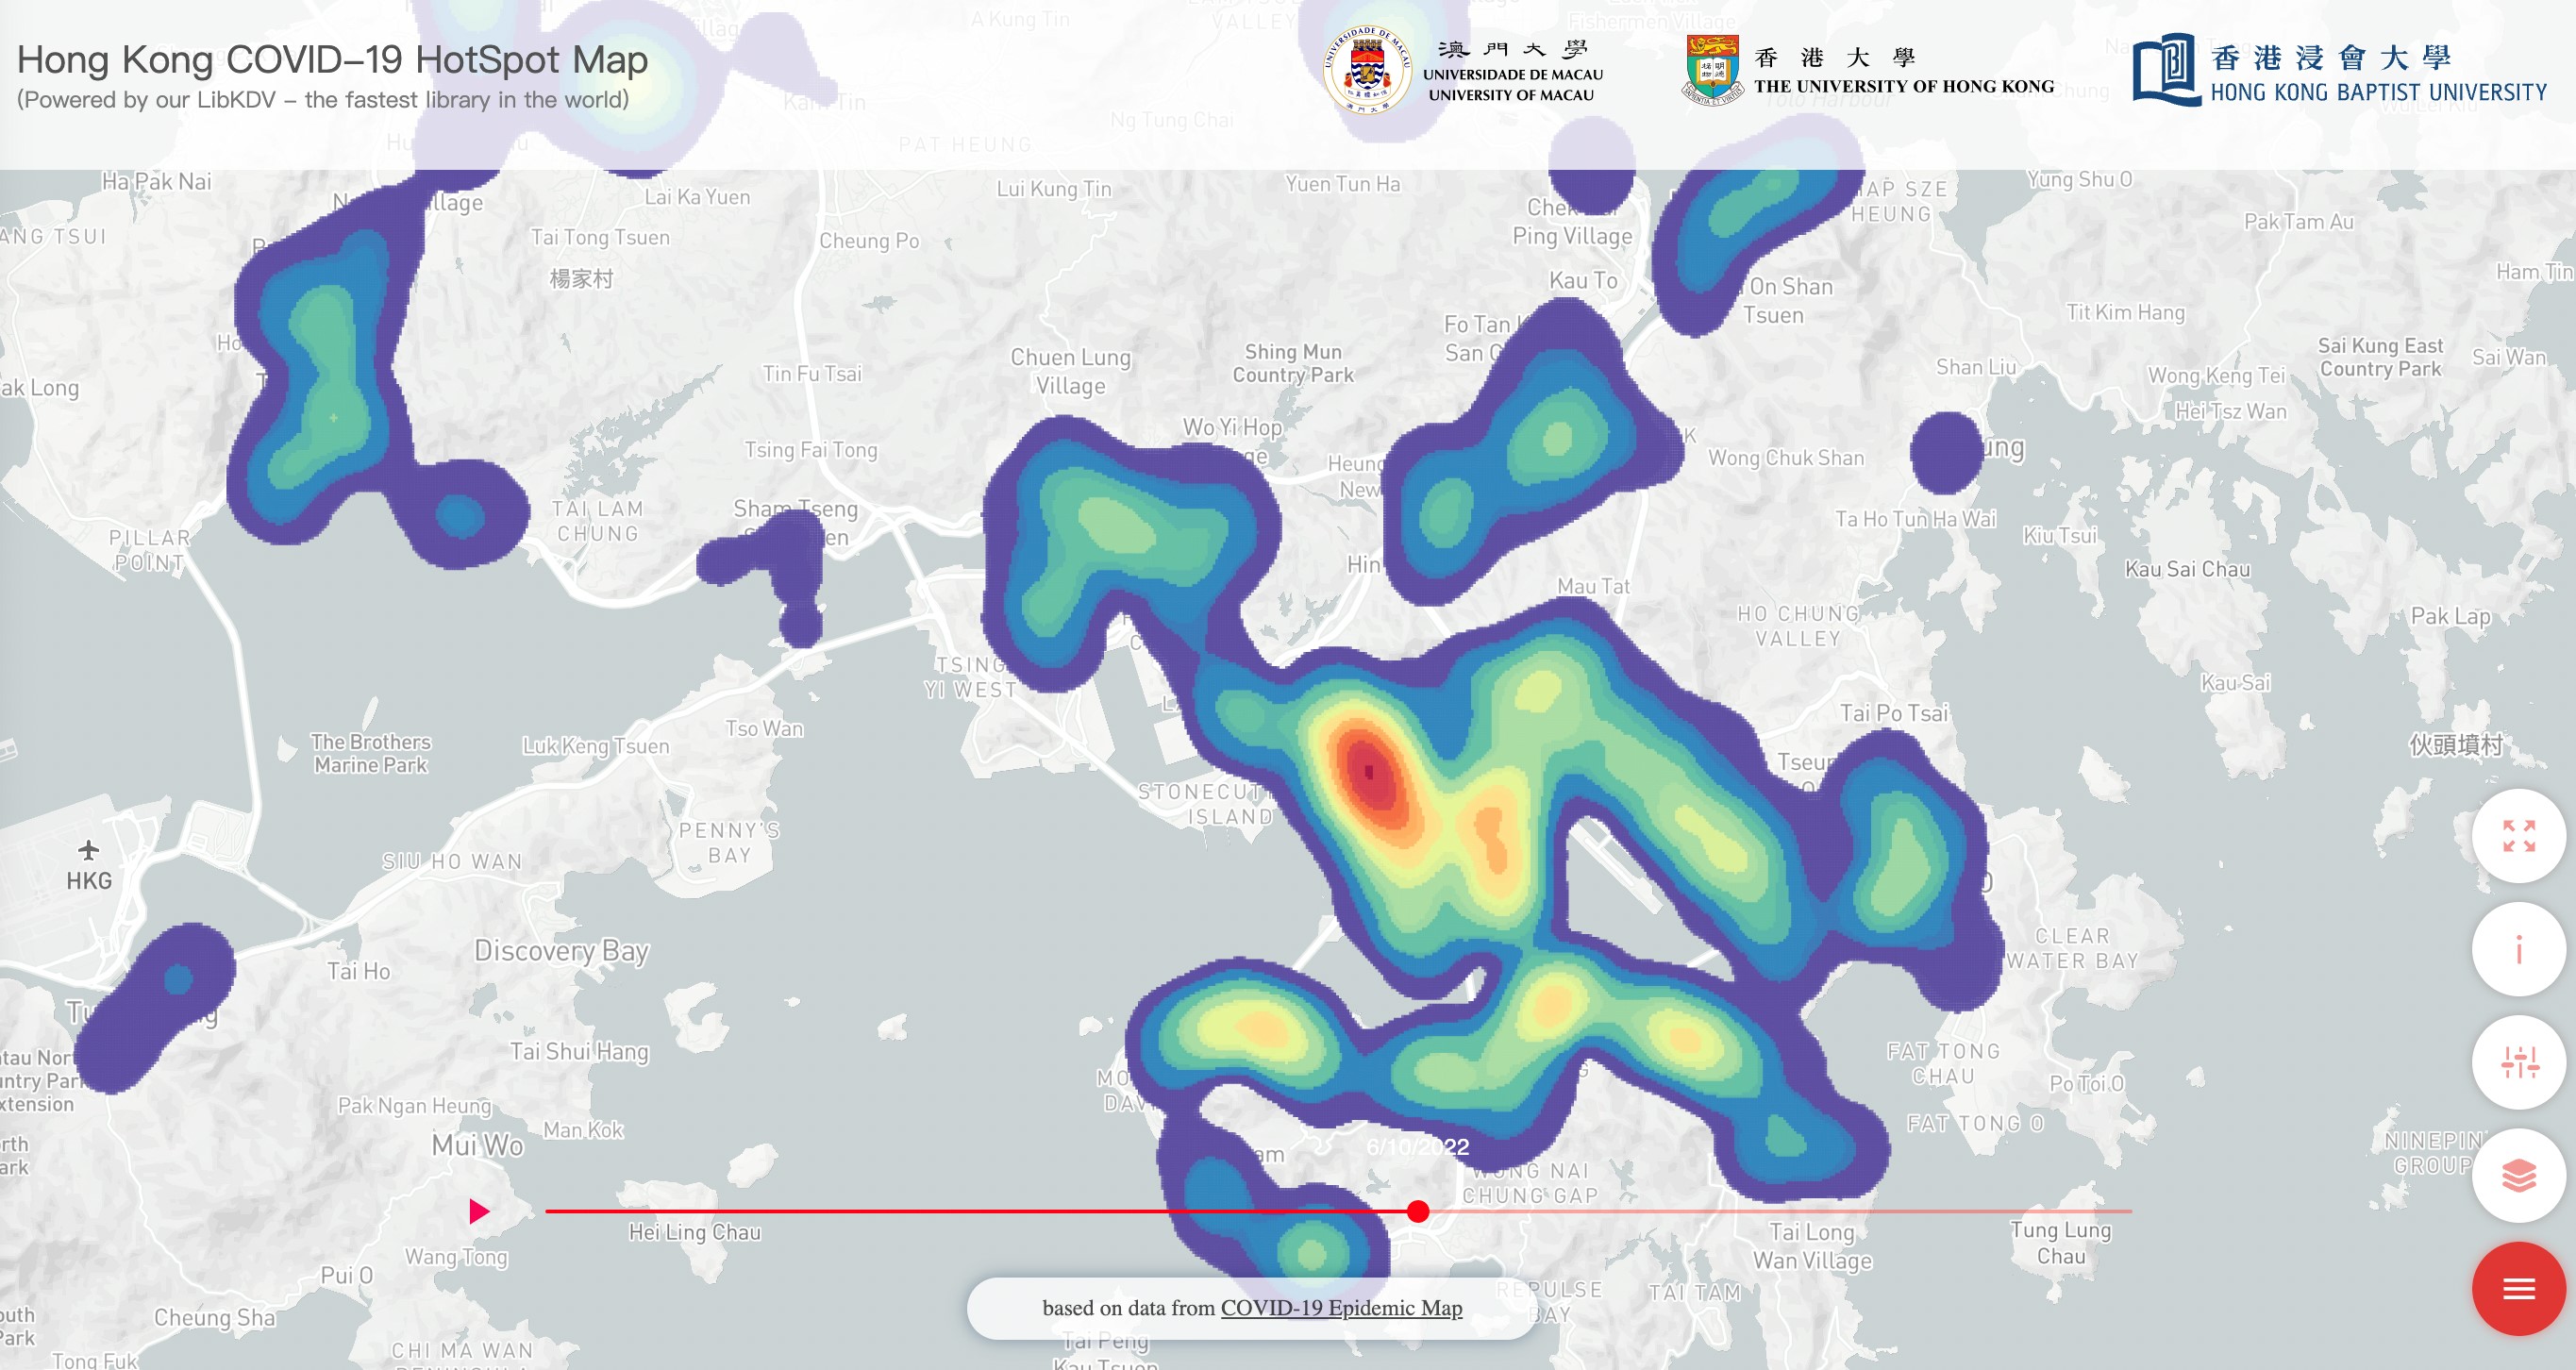 Hong Kong COVID-19 Hotspot Map allows the visualisation of real-time and dynamic geographic distribution of COVID-19 cases in Hong Kong.